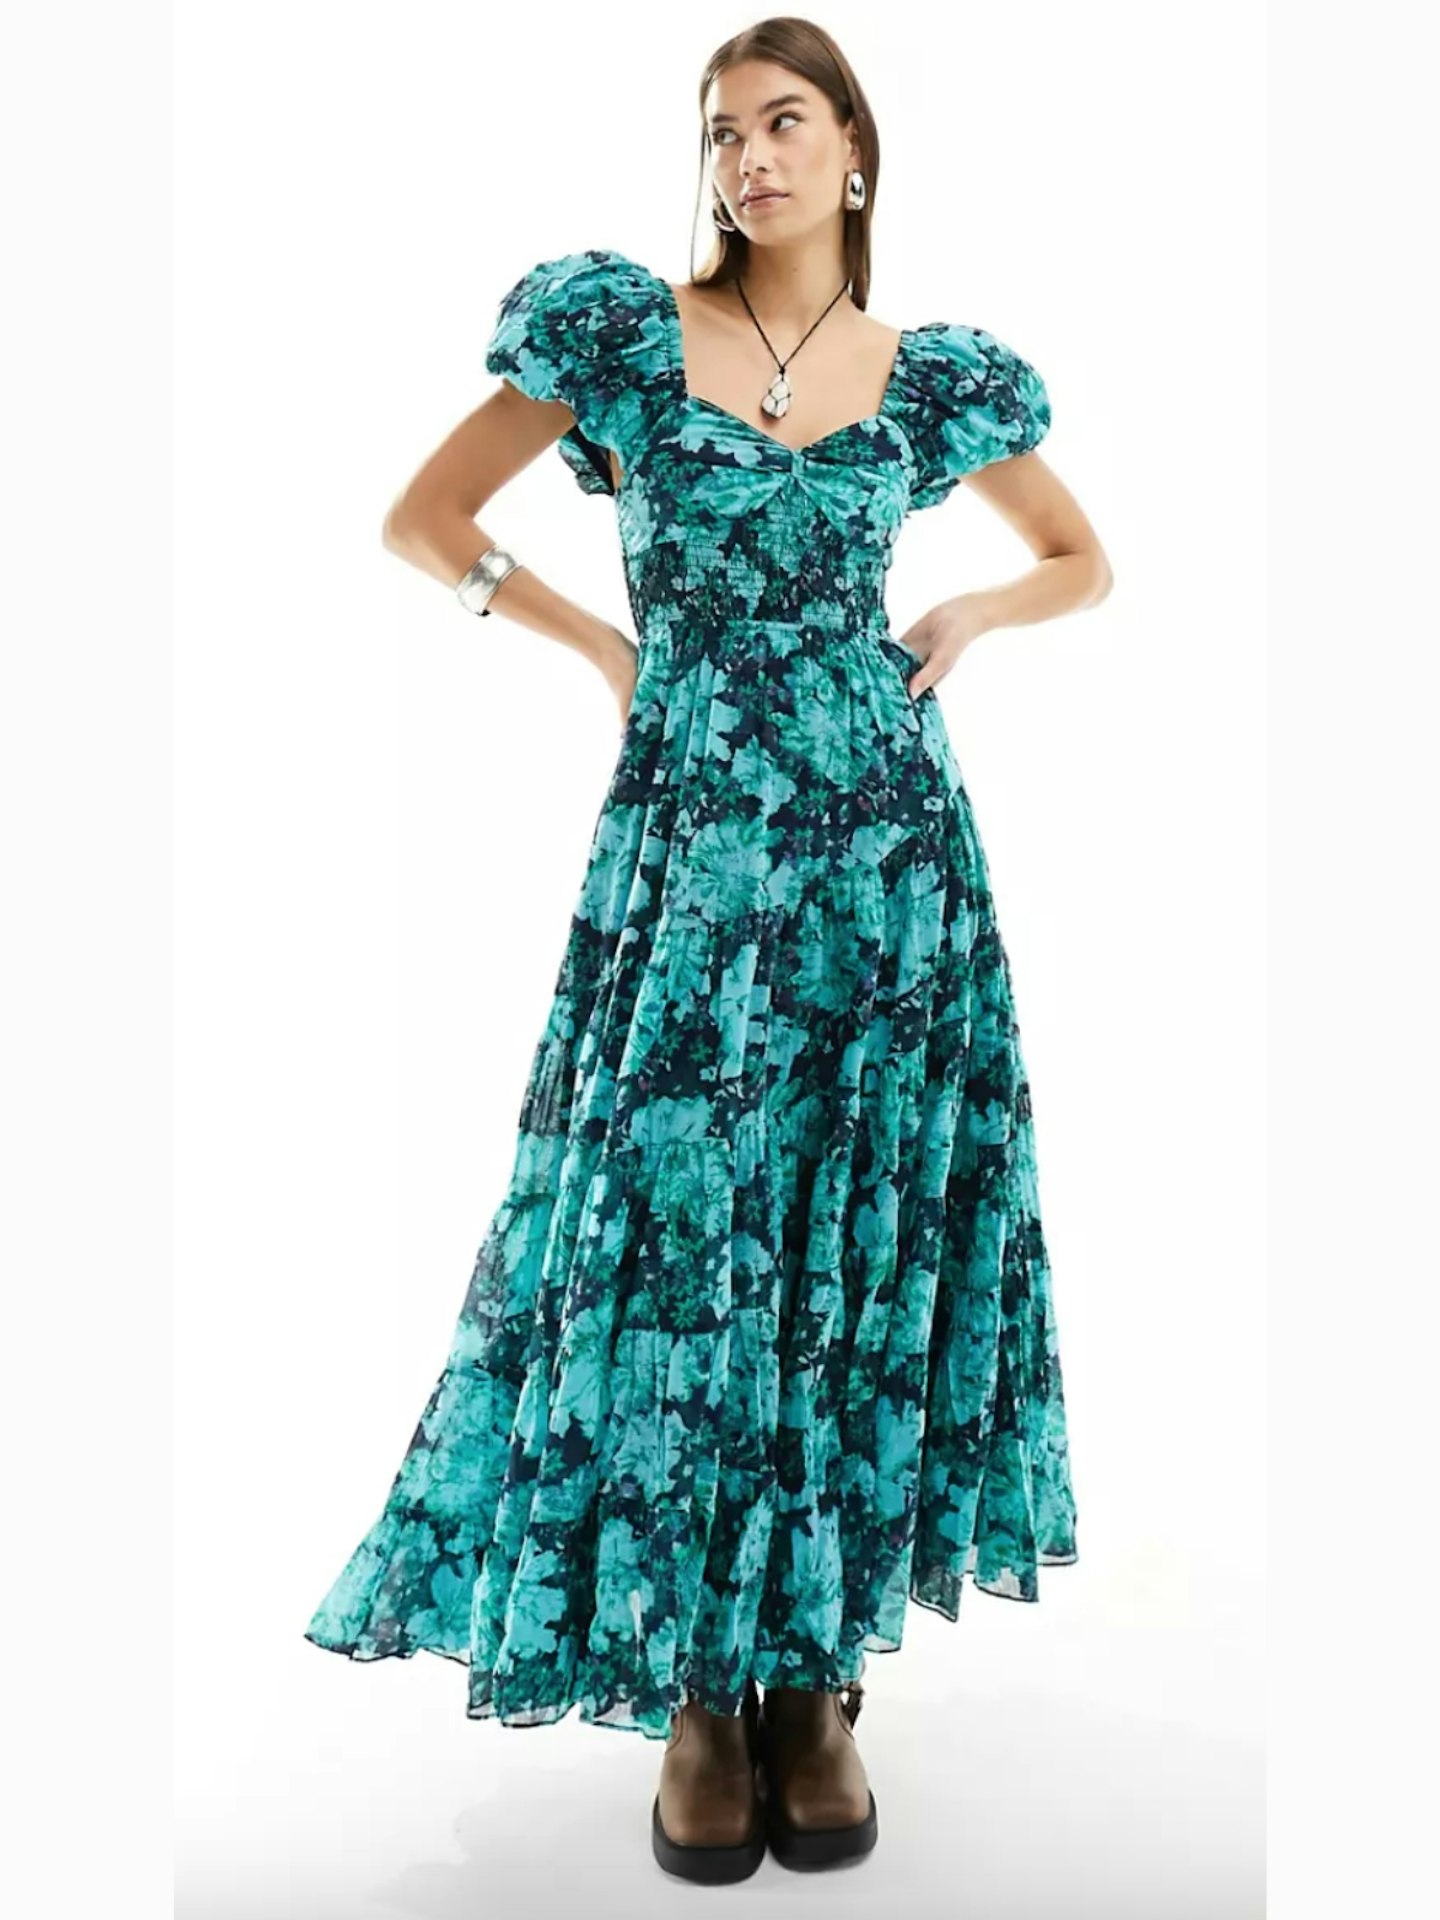 ASOS Free People Puff Sleeve Floral Print Tiered Midaxi Dress in Blue Green